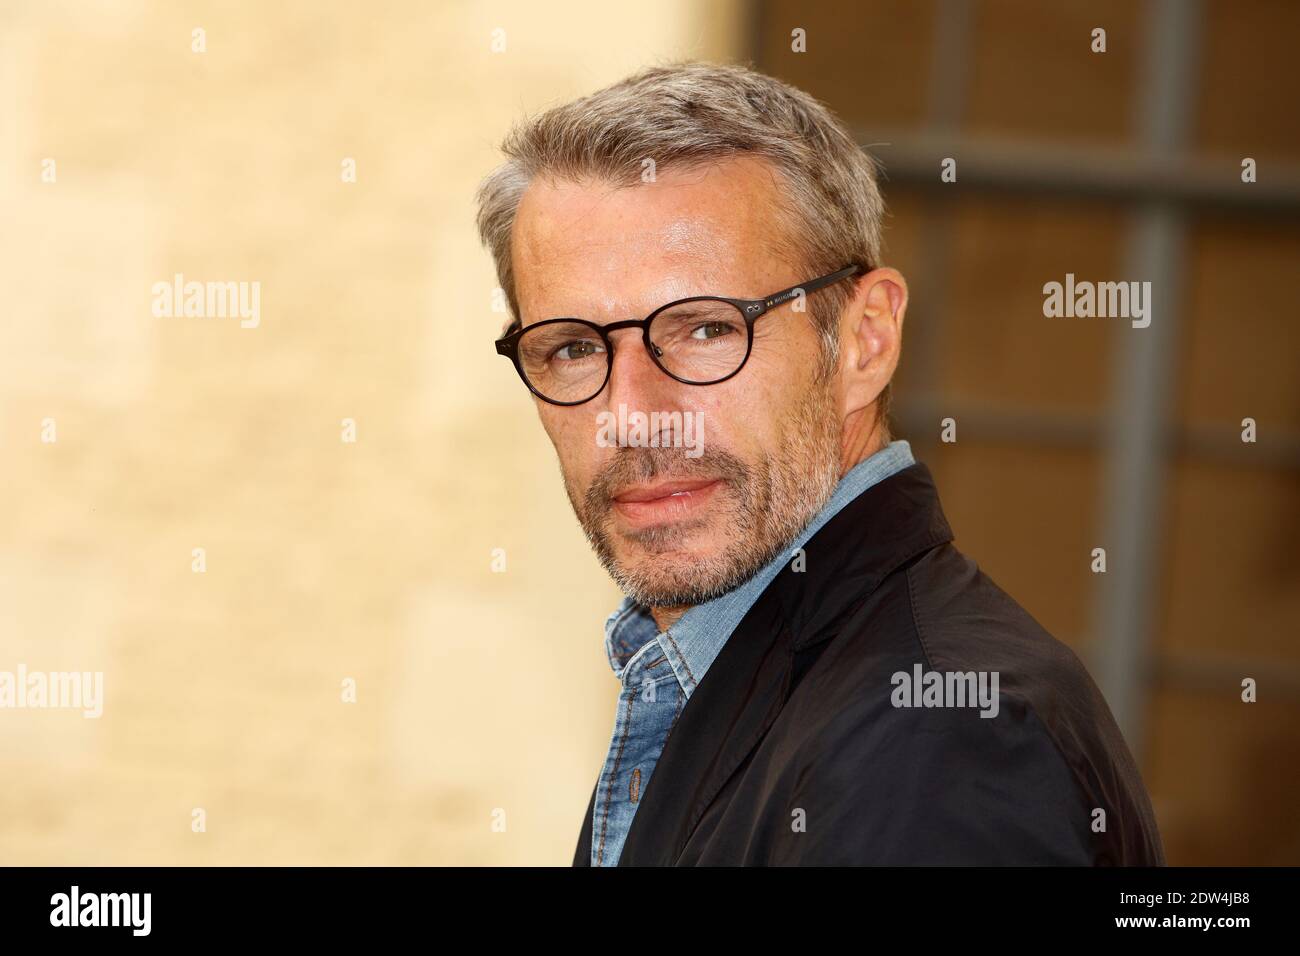 Lambert Wilson at the presentation of the movie 'Barbecue' in Lille,  northern France on April 23, 2014. Photo by Sylvain Lefevre/ABACAPRESS.COM  Stock Photo - Alamy